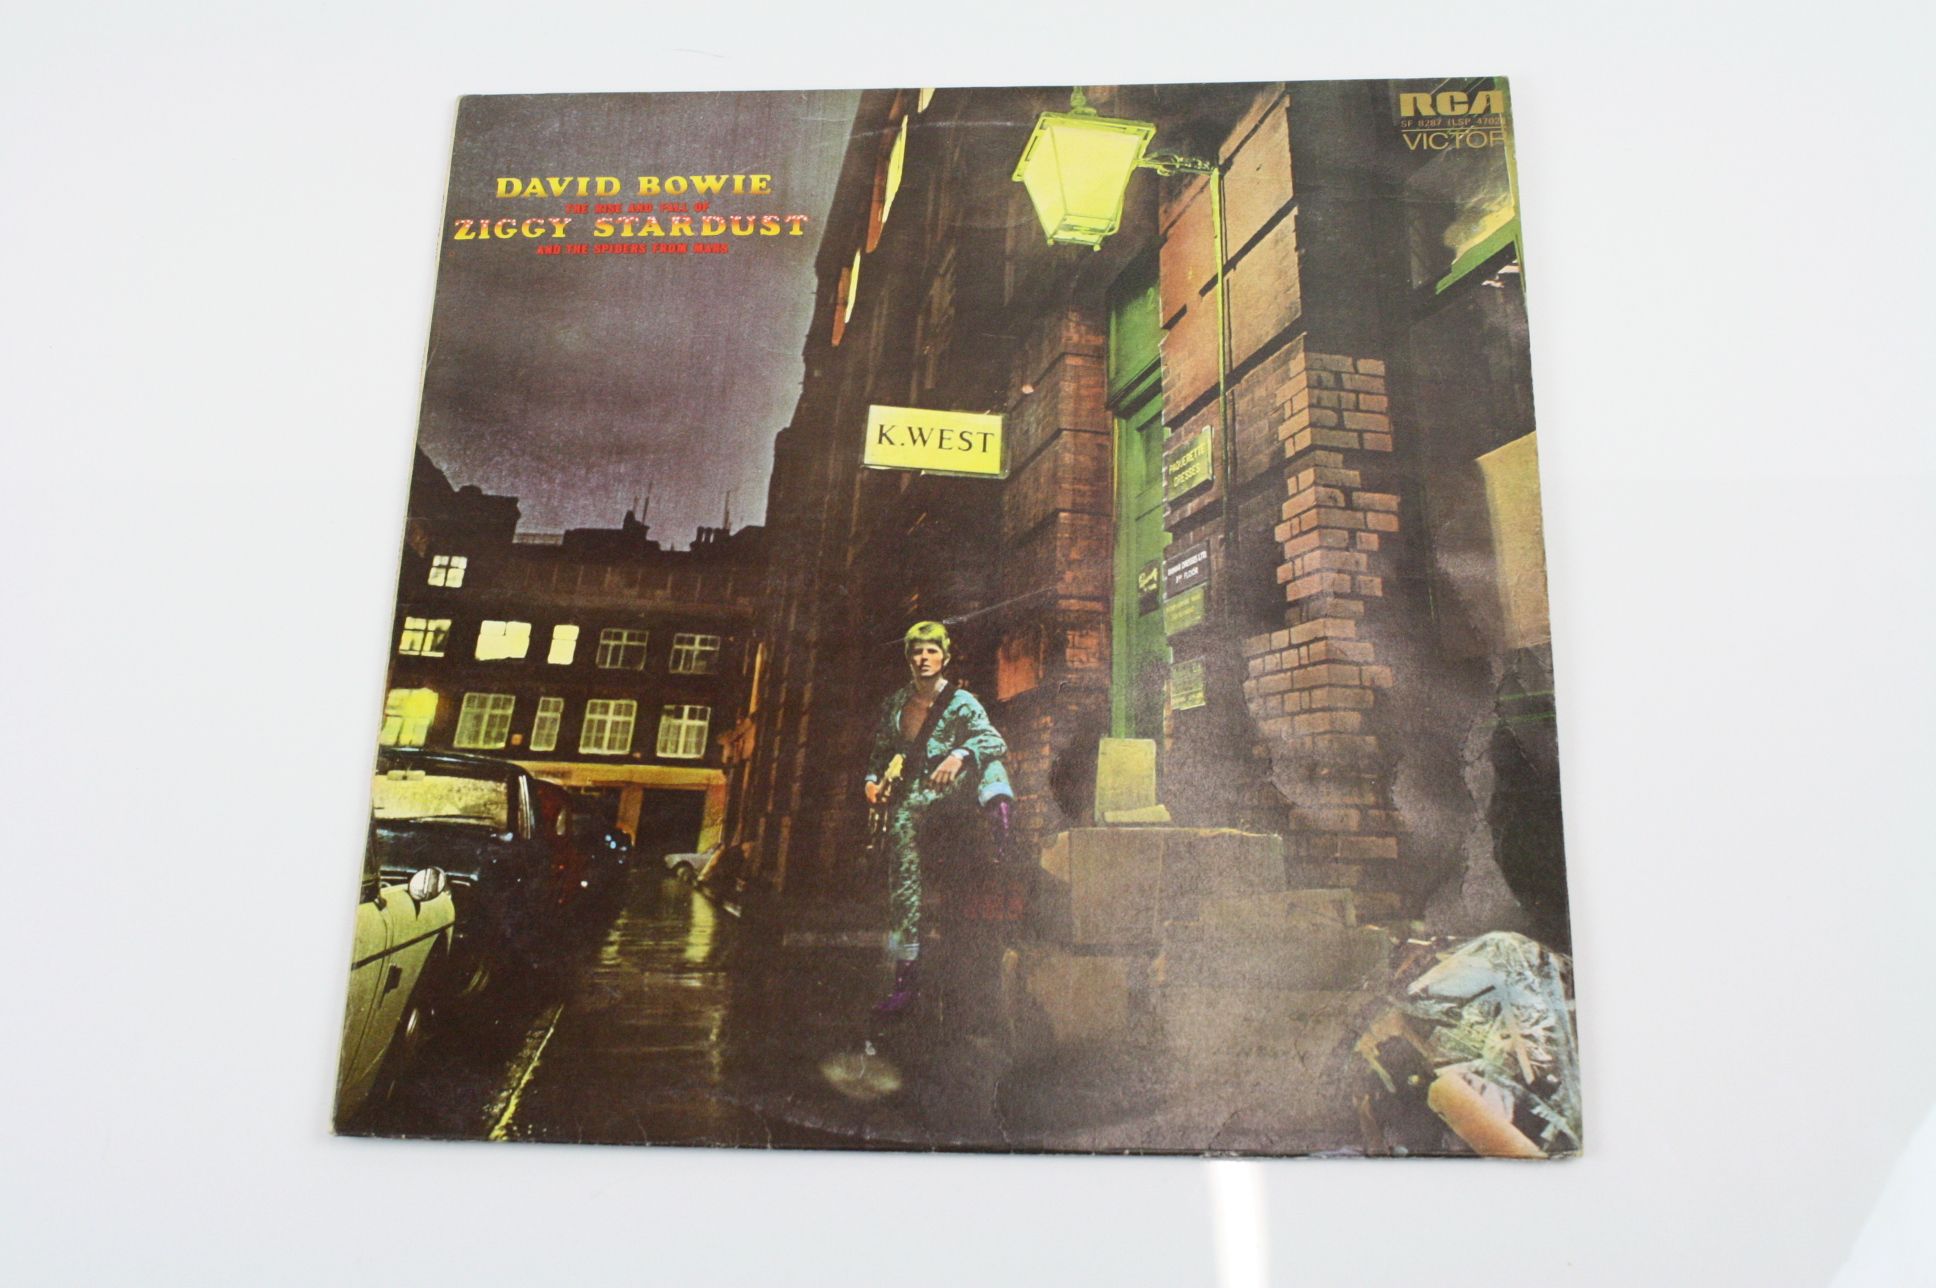 Vinyl - David Bowie Ziggy Stardust (SF 8287) early copy with Titanic / Chrysalis Music credits to - Image 2 of 10